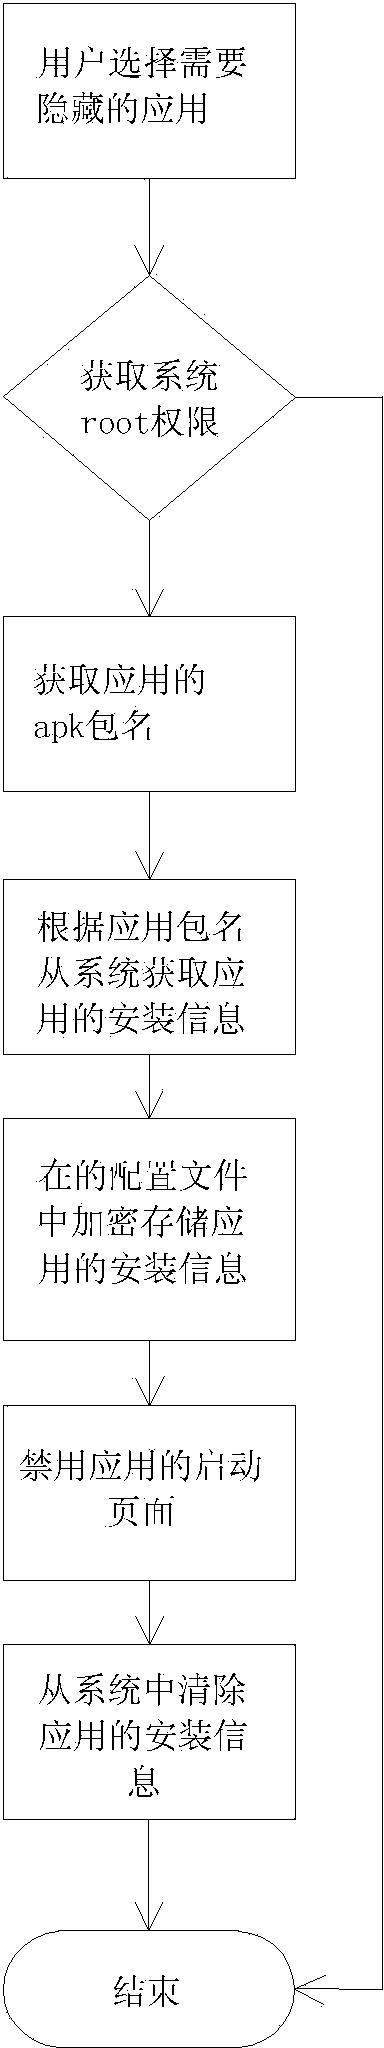 Safety protecting method for application software of portable intelligent equipment